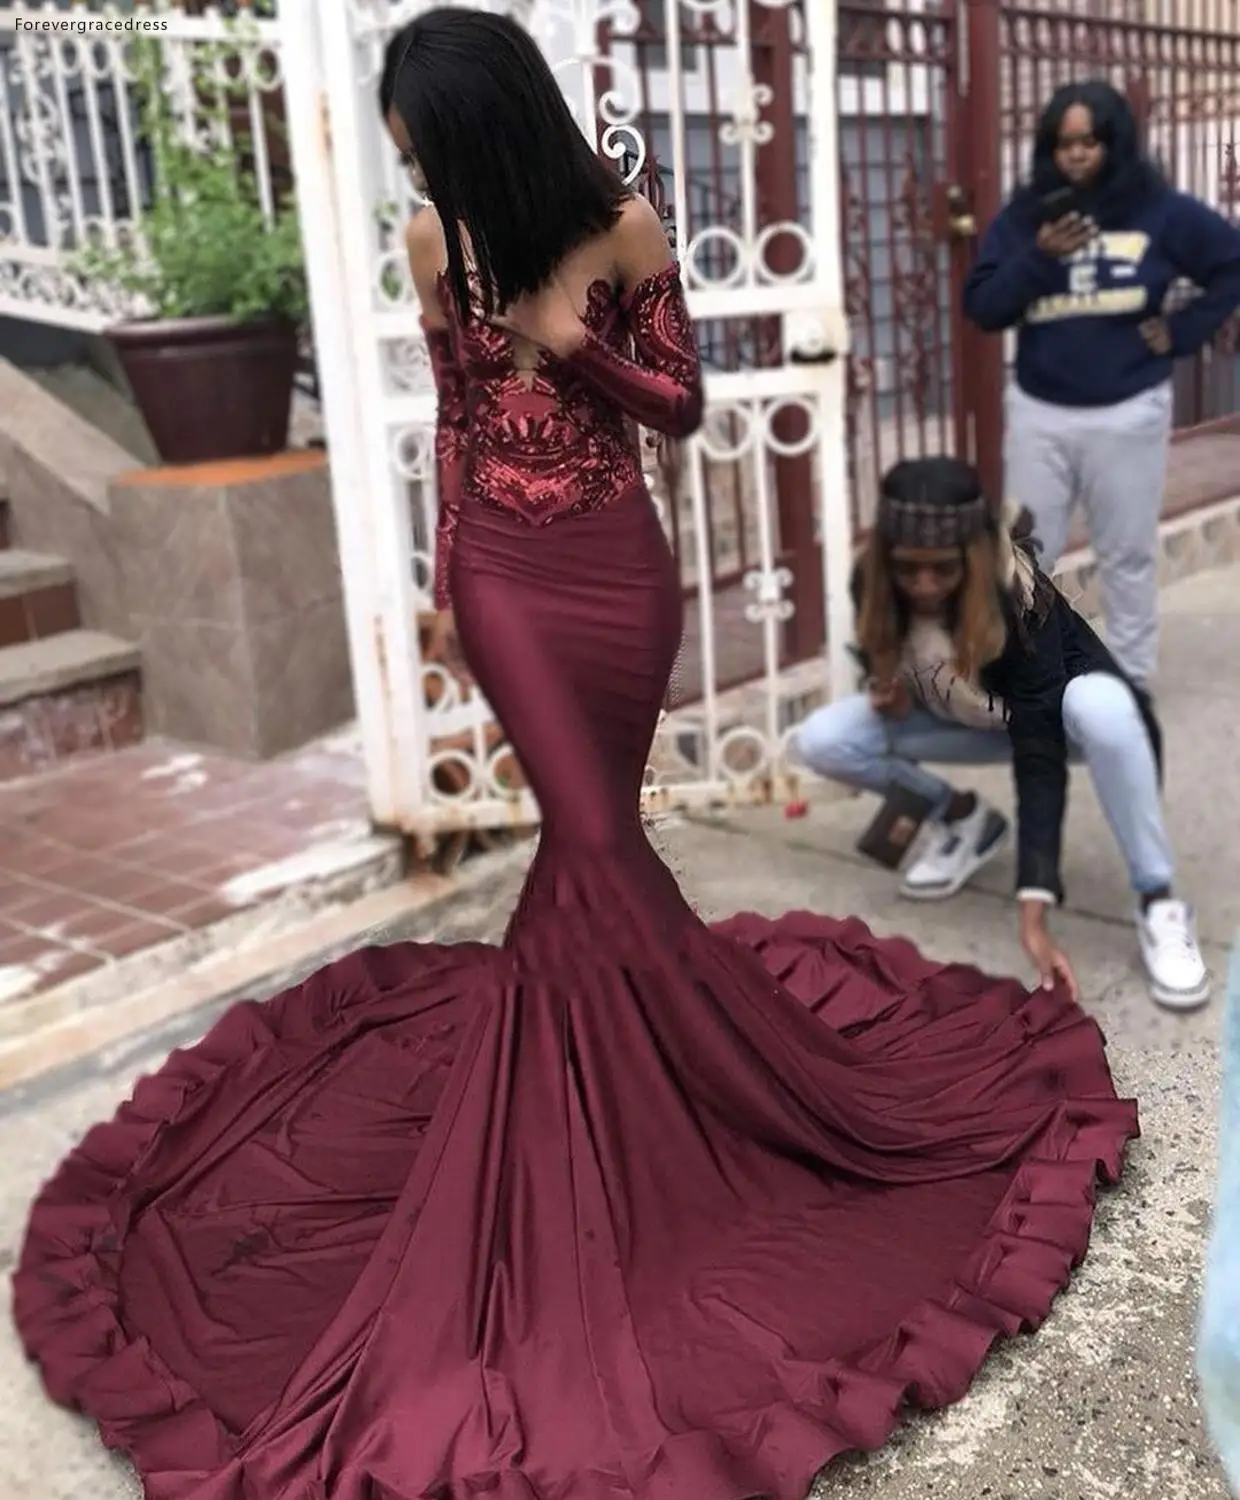 

Mermaid Burgundy Prom Dresses 2019 African Black Girls Long Sleeves Pageant Holidays Graduation Wear Formal Evening Party Gowns